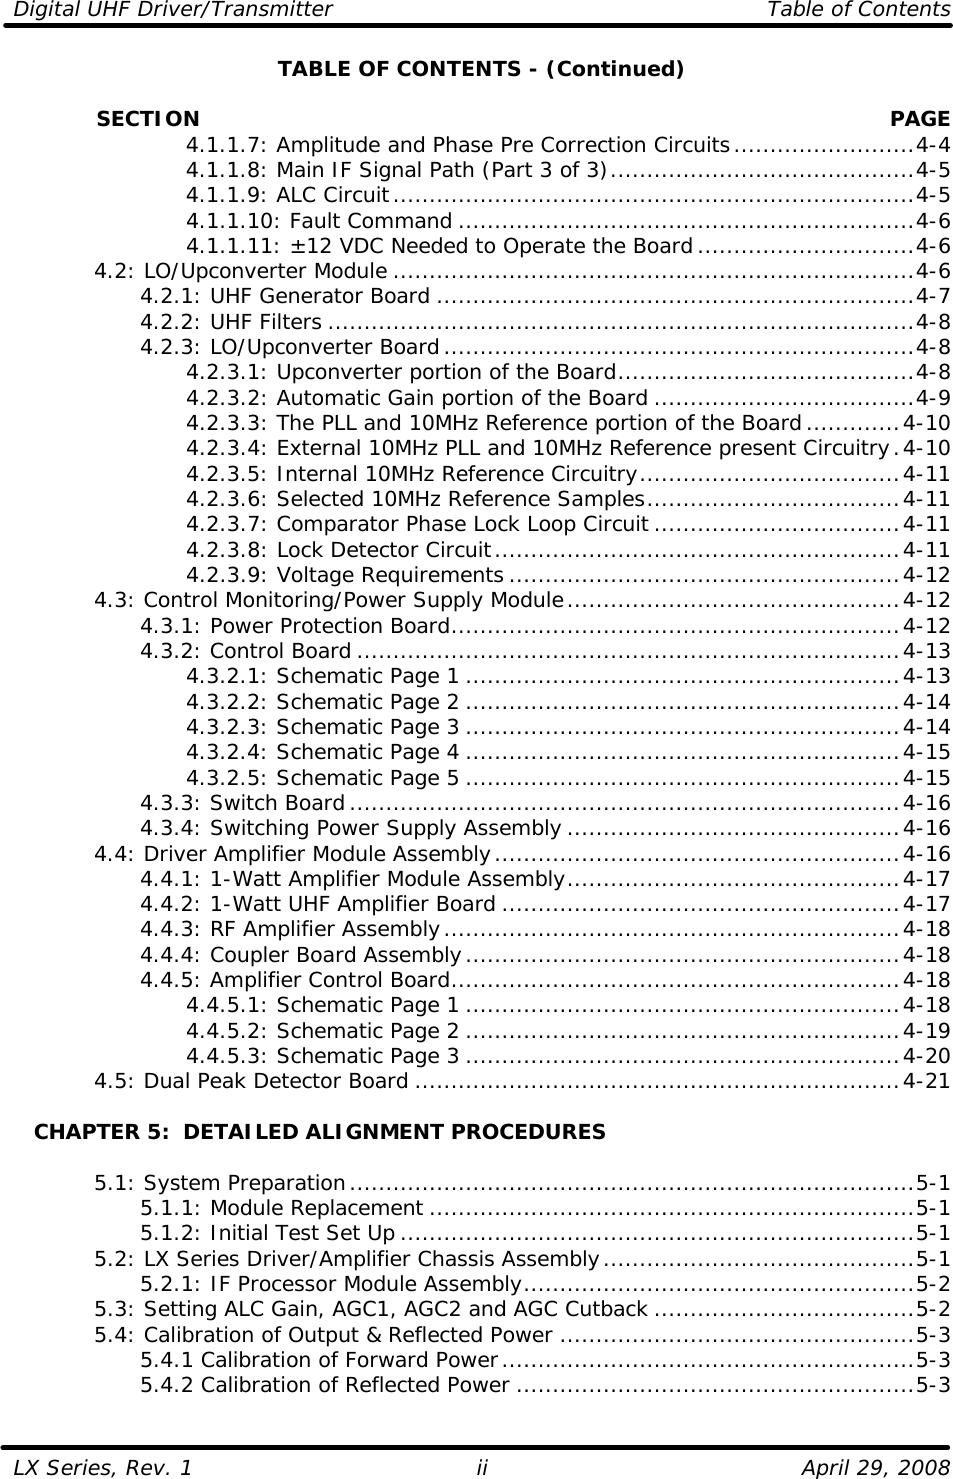 Digital UHF Driver/Transmitter    Table of Contents  LX Series, Rev. 1    April 29, 2008 iiTABLE OF CONTENTS - (Continued)              SECTION PAGE     4.1.1.7: Amplitude and Phase Pre Correction Circuits.........................4-4     4.1.1.8: Main IF Signal Path (Part 3 of 3)..........................................4-5     4.1.1.9: ALC Circuit........................................................................4-5     4.1.1.10: Fault Command ...............................................................4-6     4.1.1.11: ±12 VDC Needed to Operate the Board..............................4-6  4.2: LO/Upconverter Module ........................................................................4-6     4.2.1: UHF Generator Board ..................................................................4-7     4.2.2: UHF Filters .................................................................................4-8     4.2.3: LO/Upconverter Board.................................................................4-8     4.2.3.1: Upconverter portion of the Board.........................................4-8     4.2.3.2: Automatic Gain portion of the Board ....................................4-9     4.2.3.3: The PLL and 10MHz Reference portion of the Board.............4-10     4.2.3.4: External 10MHz PLL and 10MHz Reference present Circuitry.4-10     4.2.3.5: Internal 10MHz Reference Circuitry....................................4-11     4.2.3.6: Selected 10MHz Reference Samples...................................4-11     4.2.3.7: Comparator Phase Lock Loop Circuit ..................................4-11     4.2.3.8: Lock Detector Circuit........................................................4-11     4.2.3.9: Voltage Requirements ......................................................4-12  4.3: Control Monitoring/Power Supply Module..............................................4-12     4.3.1: Power Protection Board..............................................................4-12     4.3.2: Control Board ...........................................................................4-13     4.3.2.1: Schematic Page 1 ............................................................4-13     4.3.2.2: Schematic Page 2 ............................................................4-14     4.3.2.3: Schematic Page 3 ............................................................4-14     4.3.2.4: Schematic Page 4 ............................................................4-15     4.3.2.5: Schematic Page 5 ............................................................4-15     4.3.3: Switch Board............................................................................4-16     4.3.4: Switching Power Supply Assembly ..............................................4-16  4.4: Driver Amplifier Module Assembly........................................................4-16     4.4.1: 1-Watt Amplifier Module Assembly..............................................4-17     4.4.2: 1-Watt UHF Amplifier Board .......................................................4-17     4.4.3: RF Amplifier Assembly...............................................................4-18     4.4.4: Coupler Board Assembly............................................................4-18     4.4.5: Amplifier Control Board..............................................................4-18     4.4.5.1: Schematic Page 1 ............................................................4-18     4.4.5.2: Schematic Page 2 ............................................................4-19     4.4.5.3: Schematic Page 3 ............................................................4-20  4.5: Dual Peak Detector Board ...................................................................4-21     CHAPTER 5:  DETAILED ALIGNMENT PROCEDURES   5.1: System Preparation..............................................................................5-1     5.1.1: Module Replacement ...................................................................5-1     5.1.2: Initial Test Set Up .......................................................................5-1  5.2: LX Series Driver/Amplifier Chassis Assembly...........................................5-1     5.2.1: IF Processor Module Assembly......................................................5-2  5.3: Setting ALC Gain, AGC1, AGC2 and AGC Cutback ....................................5-2  5.4: Calibration of Output &amp; Reflected Power .................................................5-3     5.4.1 Calibration of Forward Power.........................................................5-3     5.4.2 Calibration of Reflected Power .......................................................5-3  